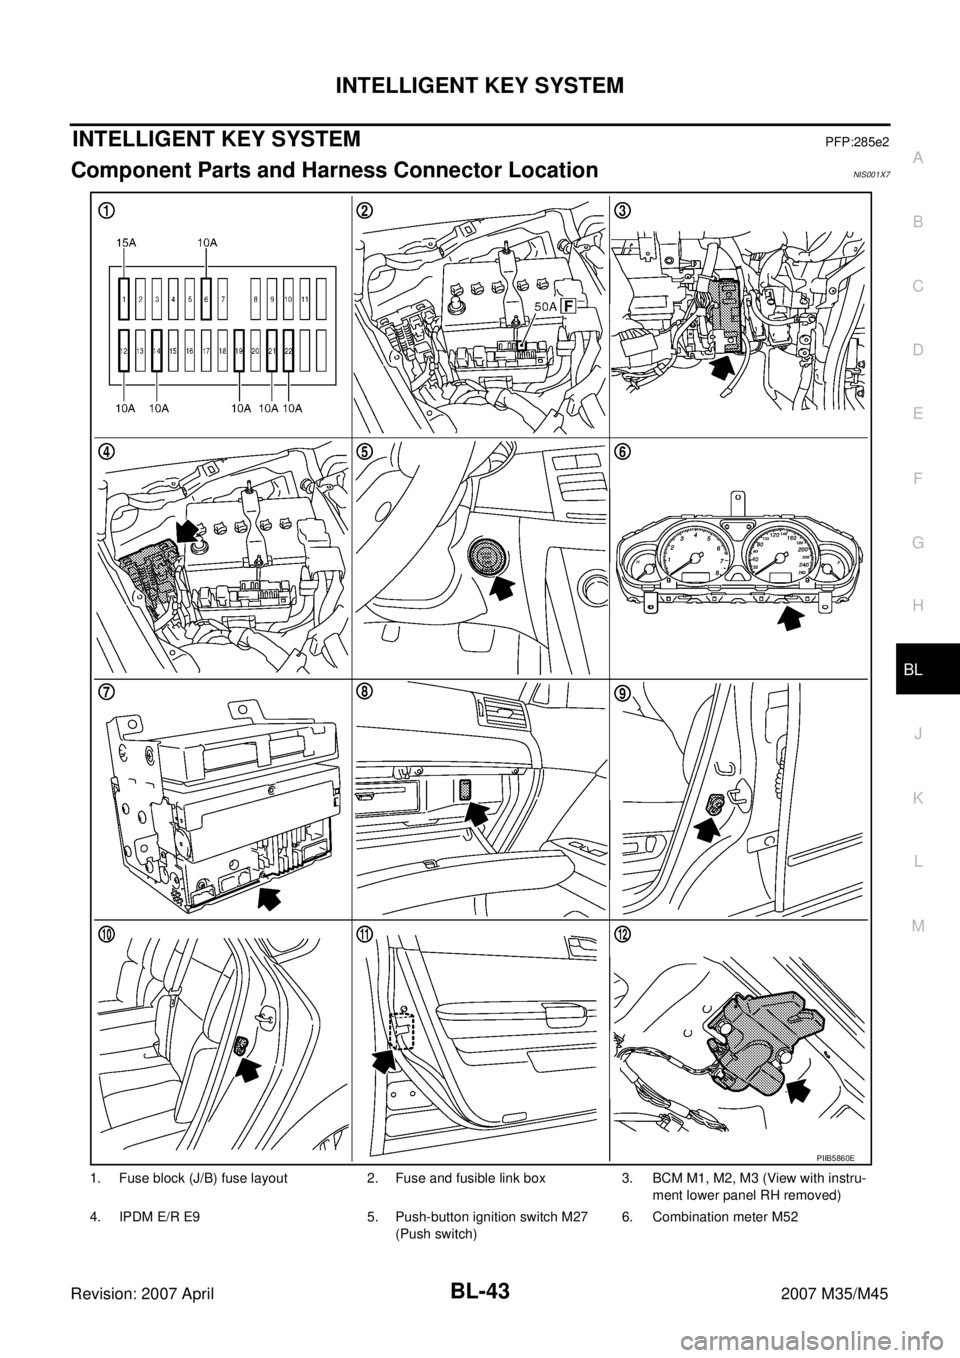 INFINITI M35 2007  Factory Service Manual INTELLIGENT KEY SYSTEM
BL-43
C
D
E
F
G
H
J
K
L
MA
B
BL
Revision: 2007 April2007 M35/M45
INTELLIGENT KEY SYSTEMPFP:285e2
Component Parts and Harness Connector LocationNIS001X7
1. Fuse block (J/B) fuse 